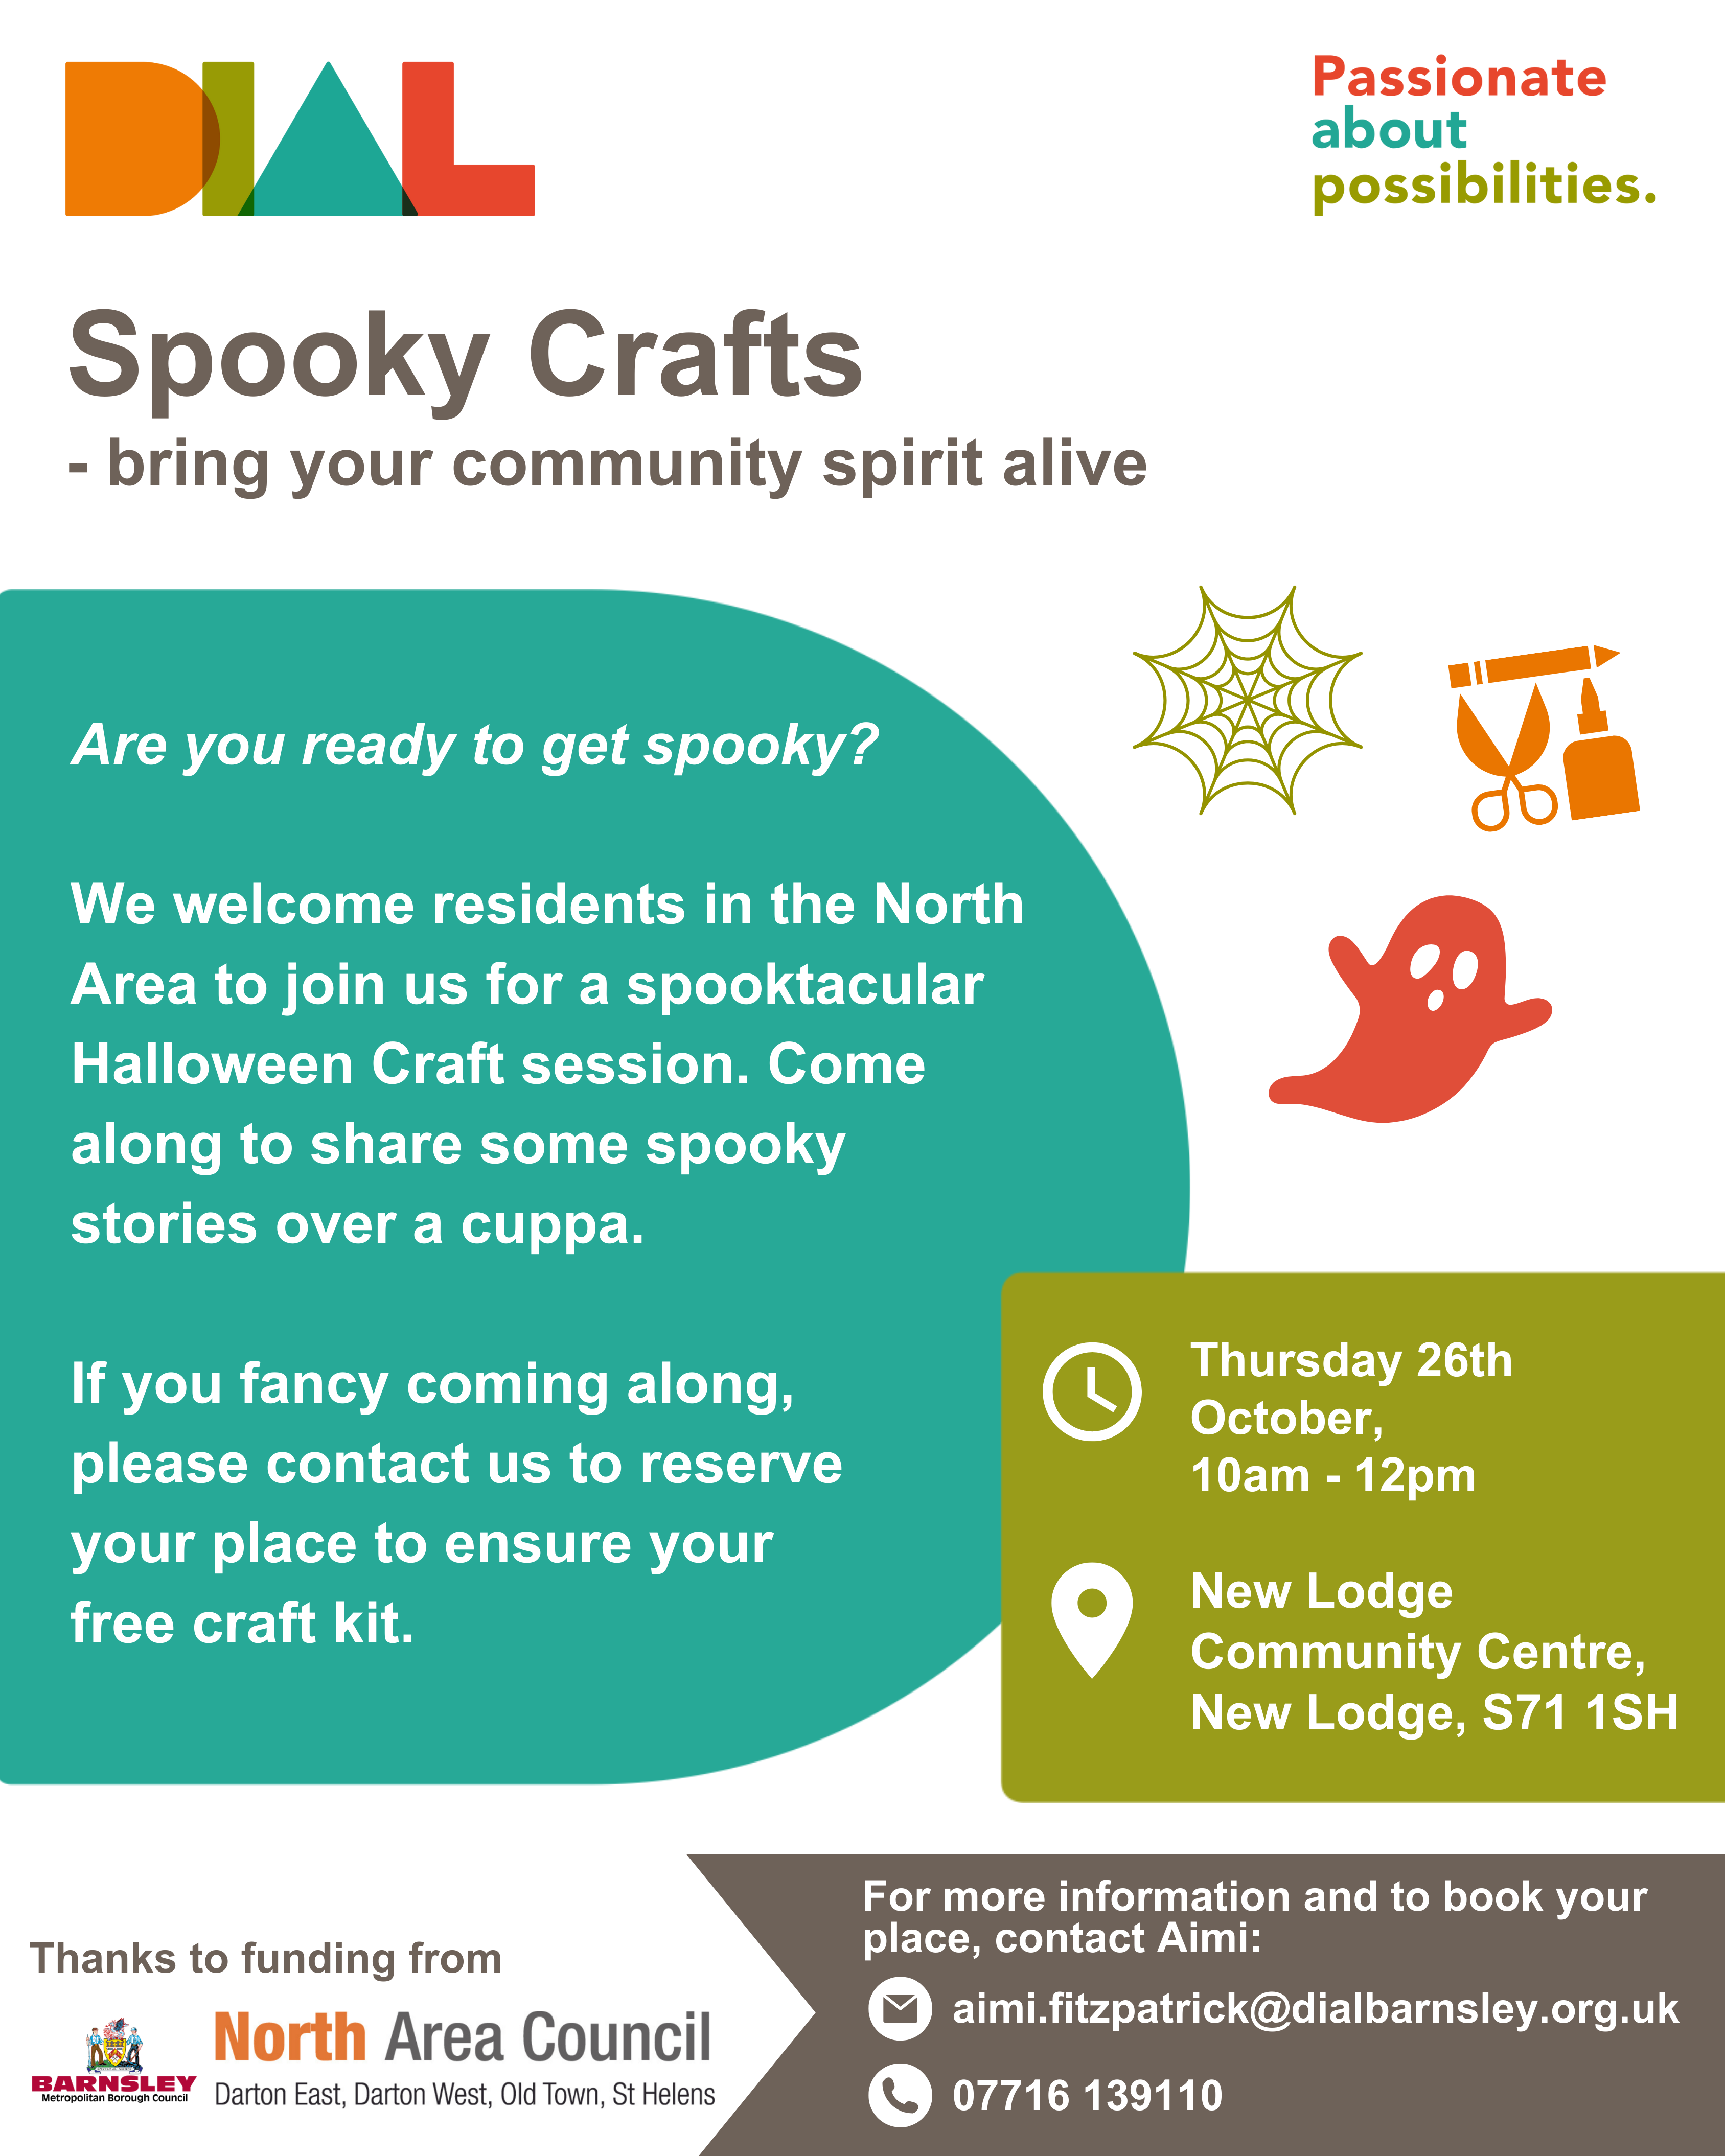 A poster with a white background, with DIAL branding of orange, green, teal and red. It includes line art icons of a picnic basket, sunshine and a selection of photographs.The poster reads: Spooky Crafts - bring your community spirit alive. Are you ready to get spooky? We welcome residents in the North Area to join us for a spooktacular Halloween Craft session. Come along to share some spooky stories over a cuppa. If you fancy coming along, please contact us to reserve your place to ensure your free craft kit.When: Thursday 26th October, 10am - 12pm.
Where: New Lodge Community Centre, New Lodge, S71 1SH.For more information and to book your place, contact Aimi by email at aimi.fitzpatrick@dialbarnsley.org.uk or by phone on 07716 139110.Thanks to funding from Barnsley Metropolitan Borough Council and North Area Council.
